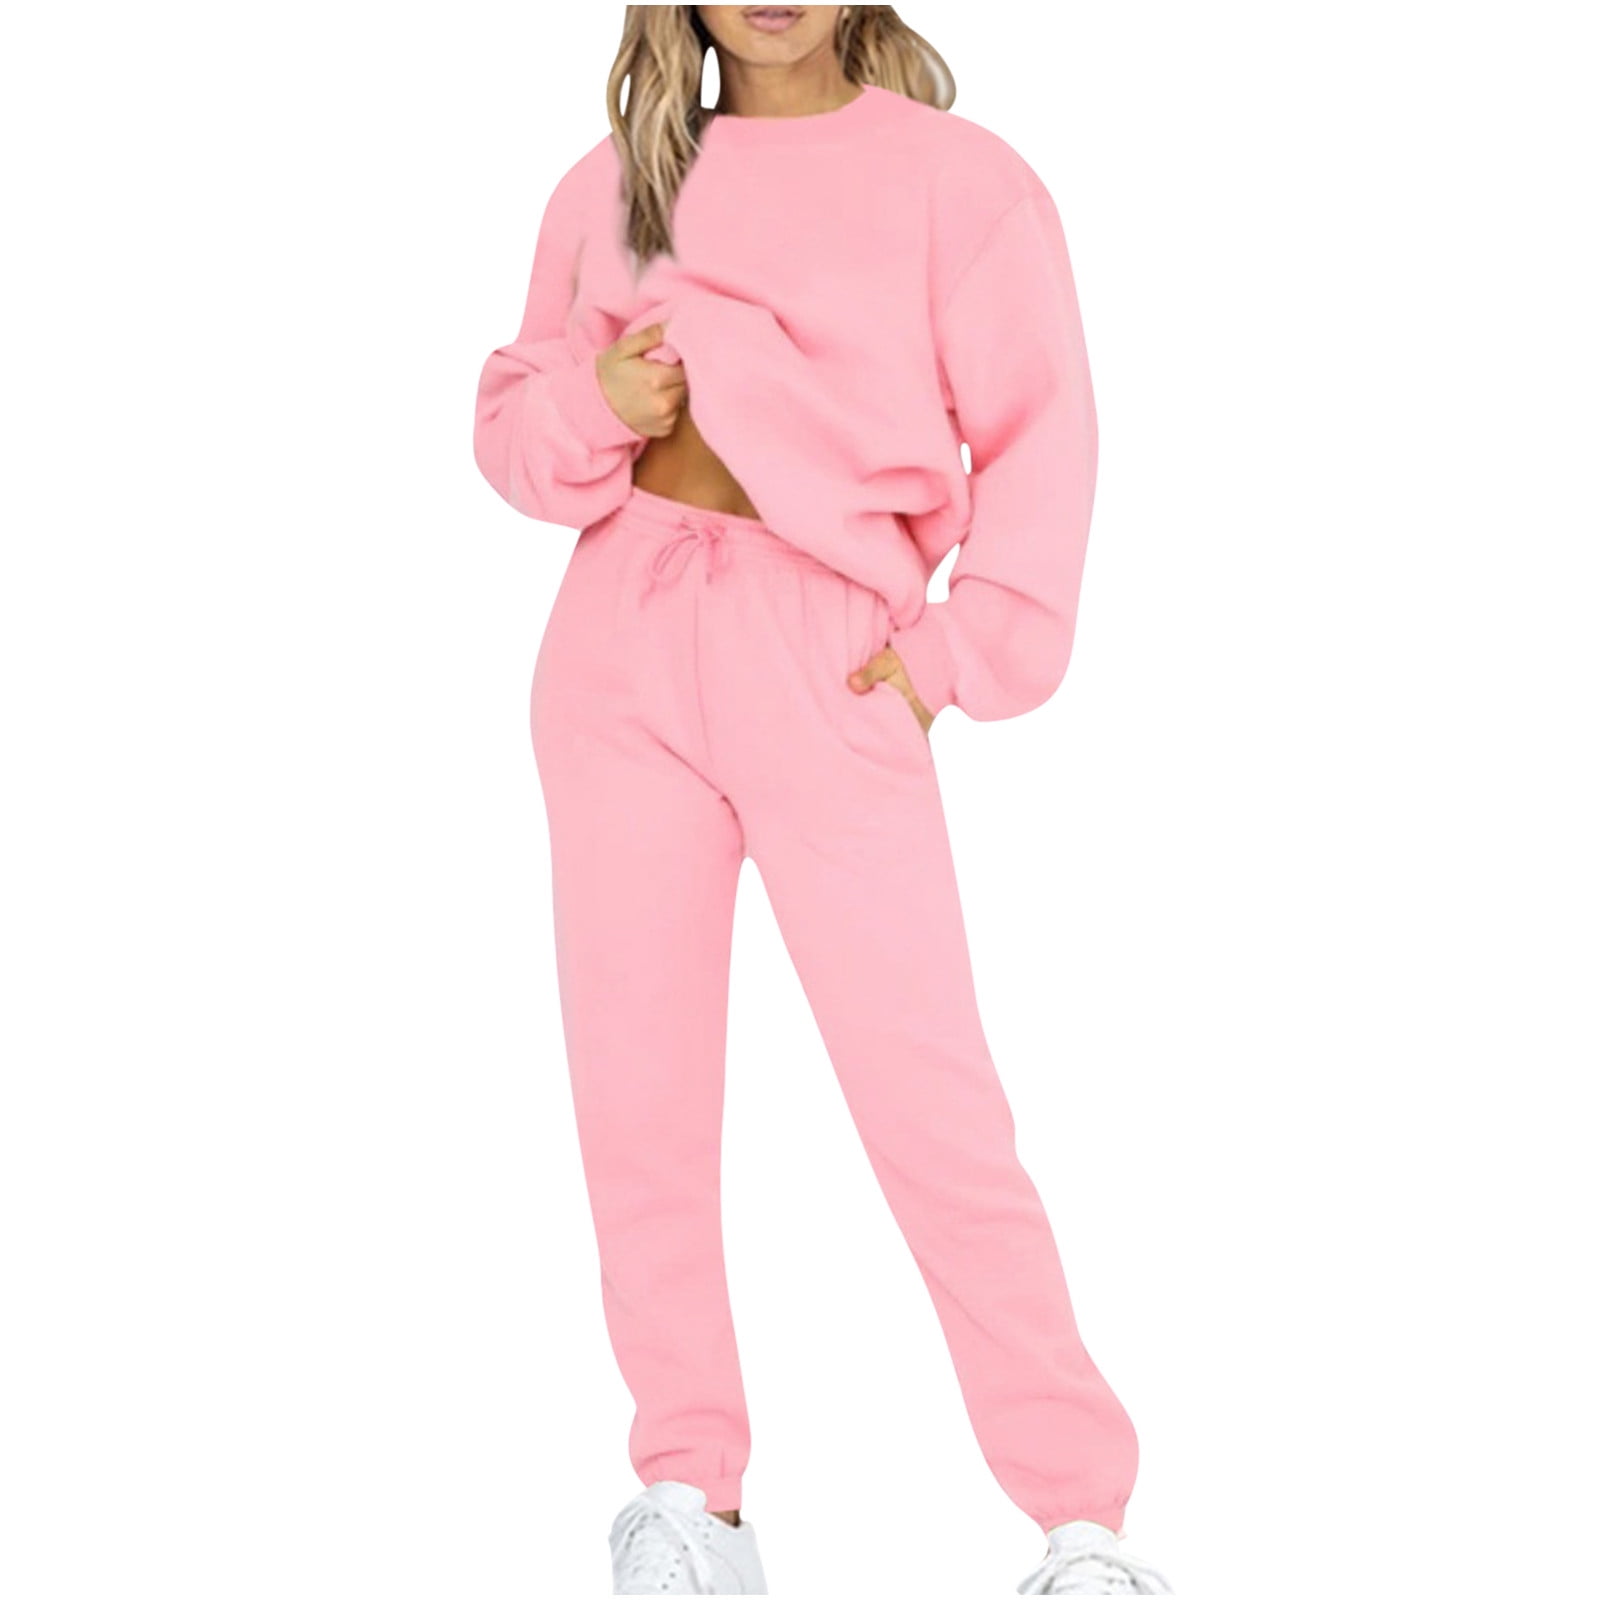 2022 Street 2 Piece Set Pink Letter Hoody Sweatshirt Top + Stacked  Sweatpants Suits Casual Sport Outfits Spring Tracksuit Suits